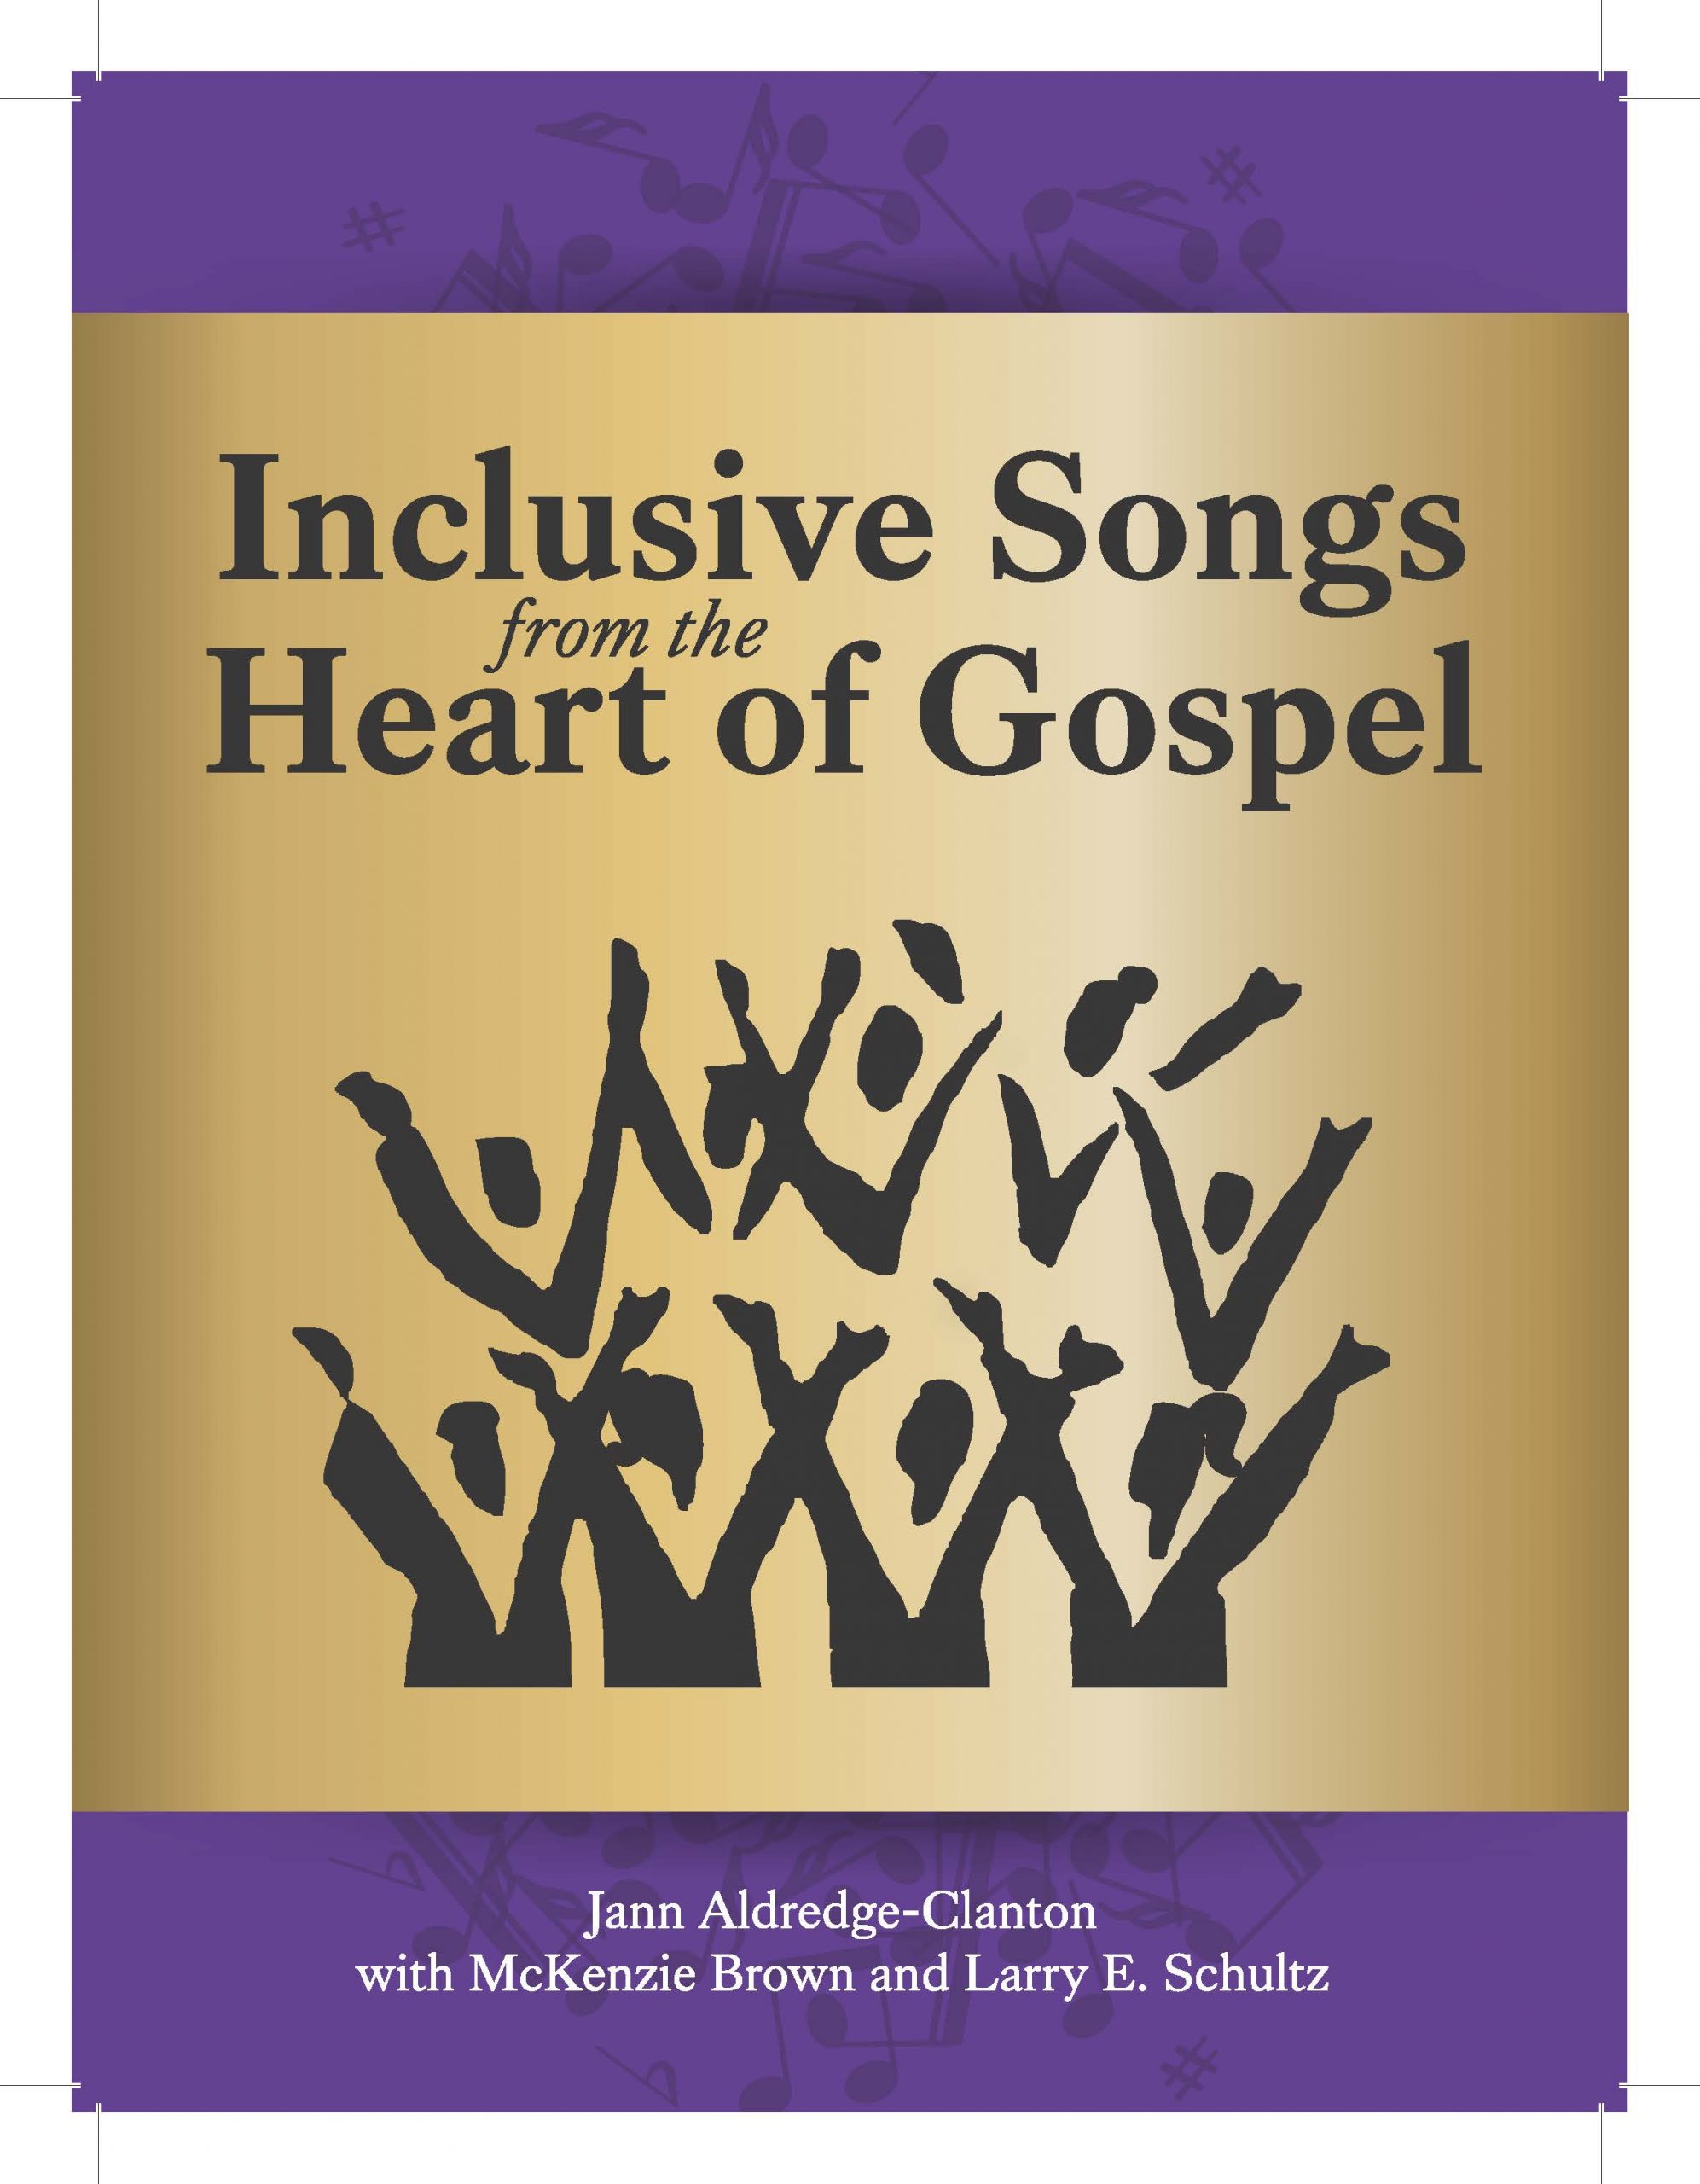 Coming Soon! Inclusive Songs from the Heart of Gospel